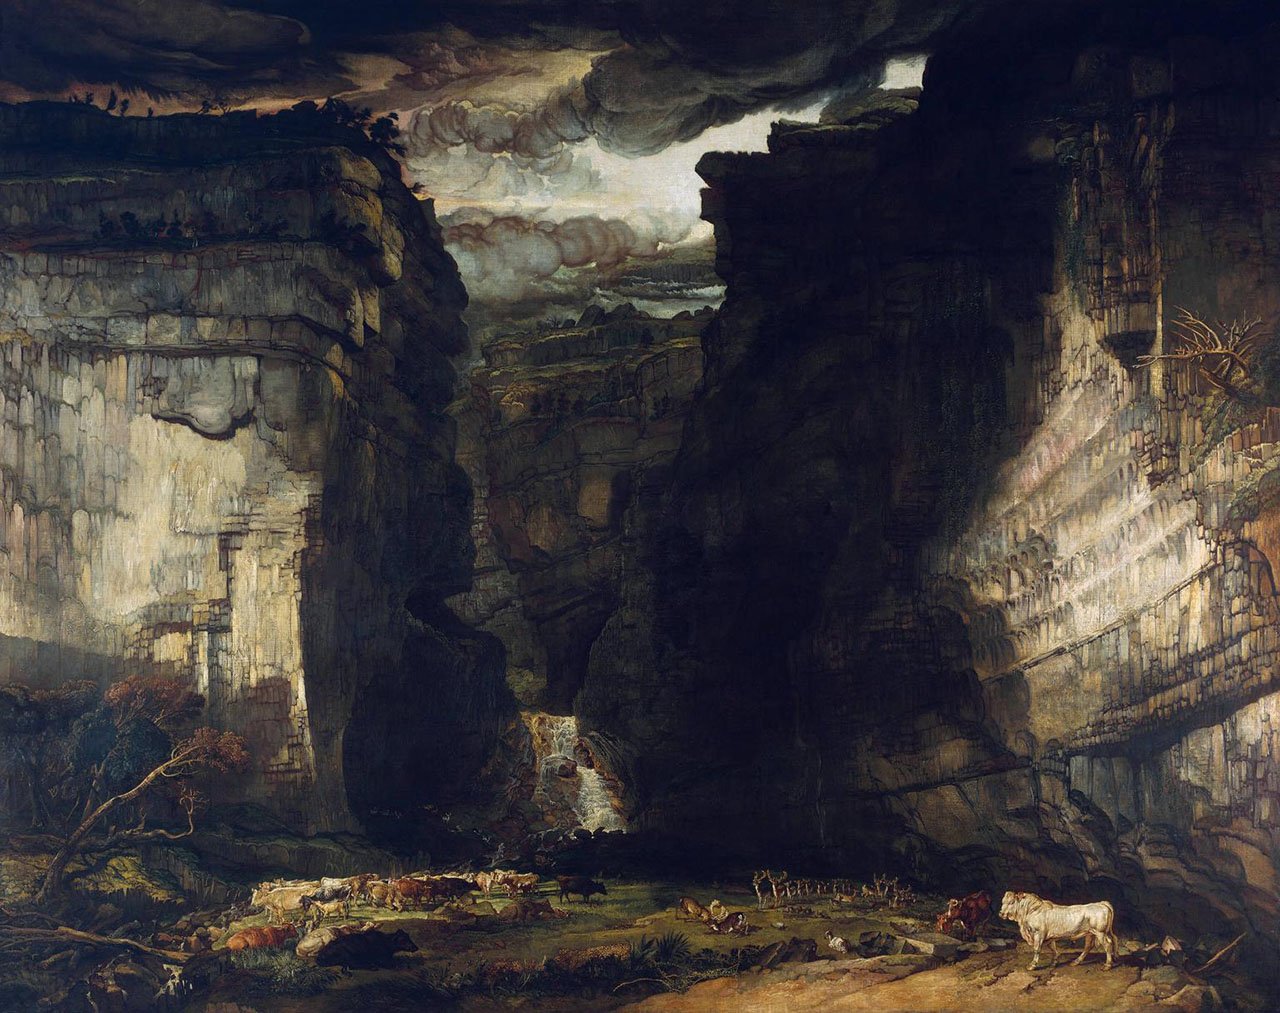 Gordale Scar (A View of Gordale, in the Manor of East Malham in Craven, Yorkshire, the Property of Lord Ribblesdale) ?1812-14, exhibited 1815 by James Ward 1769-1859